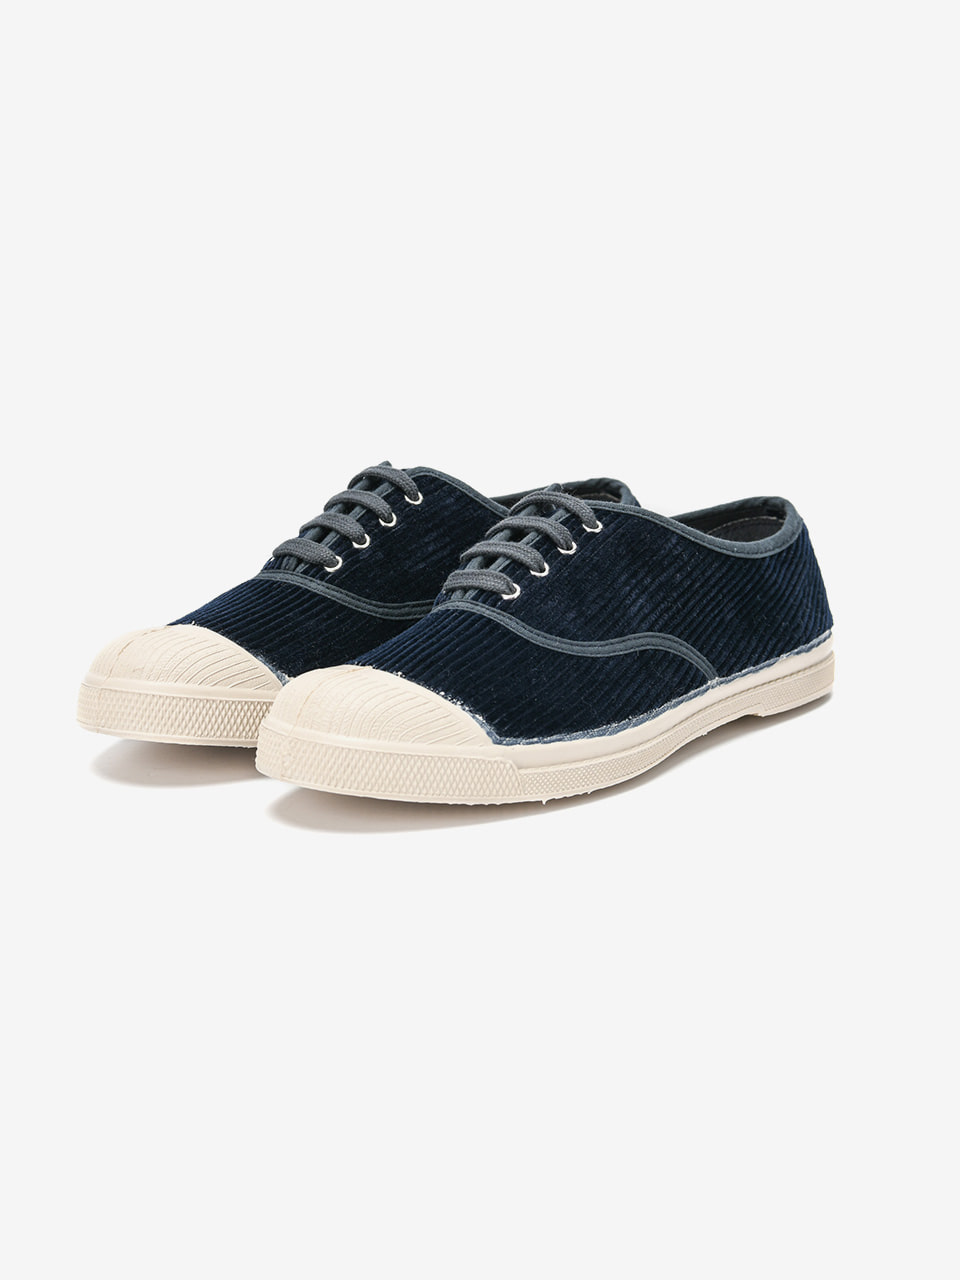 LIMITED WOMAN LACET CORDUROY - NAVY